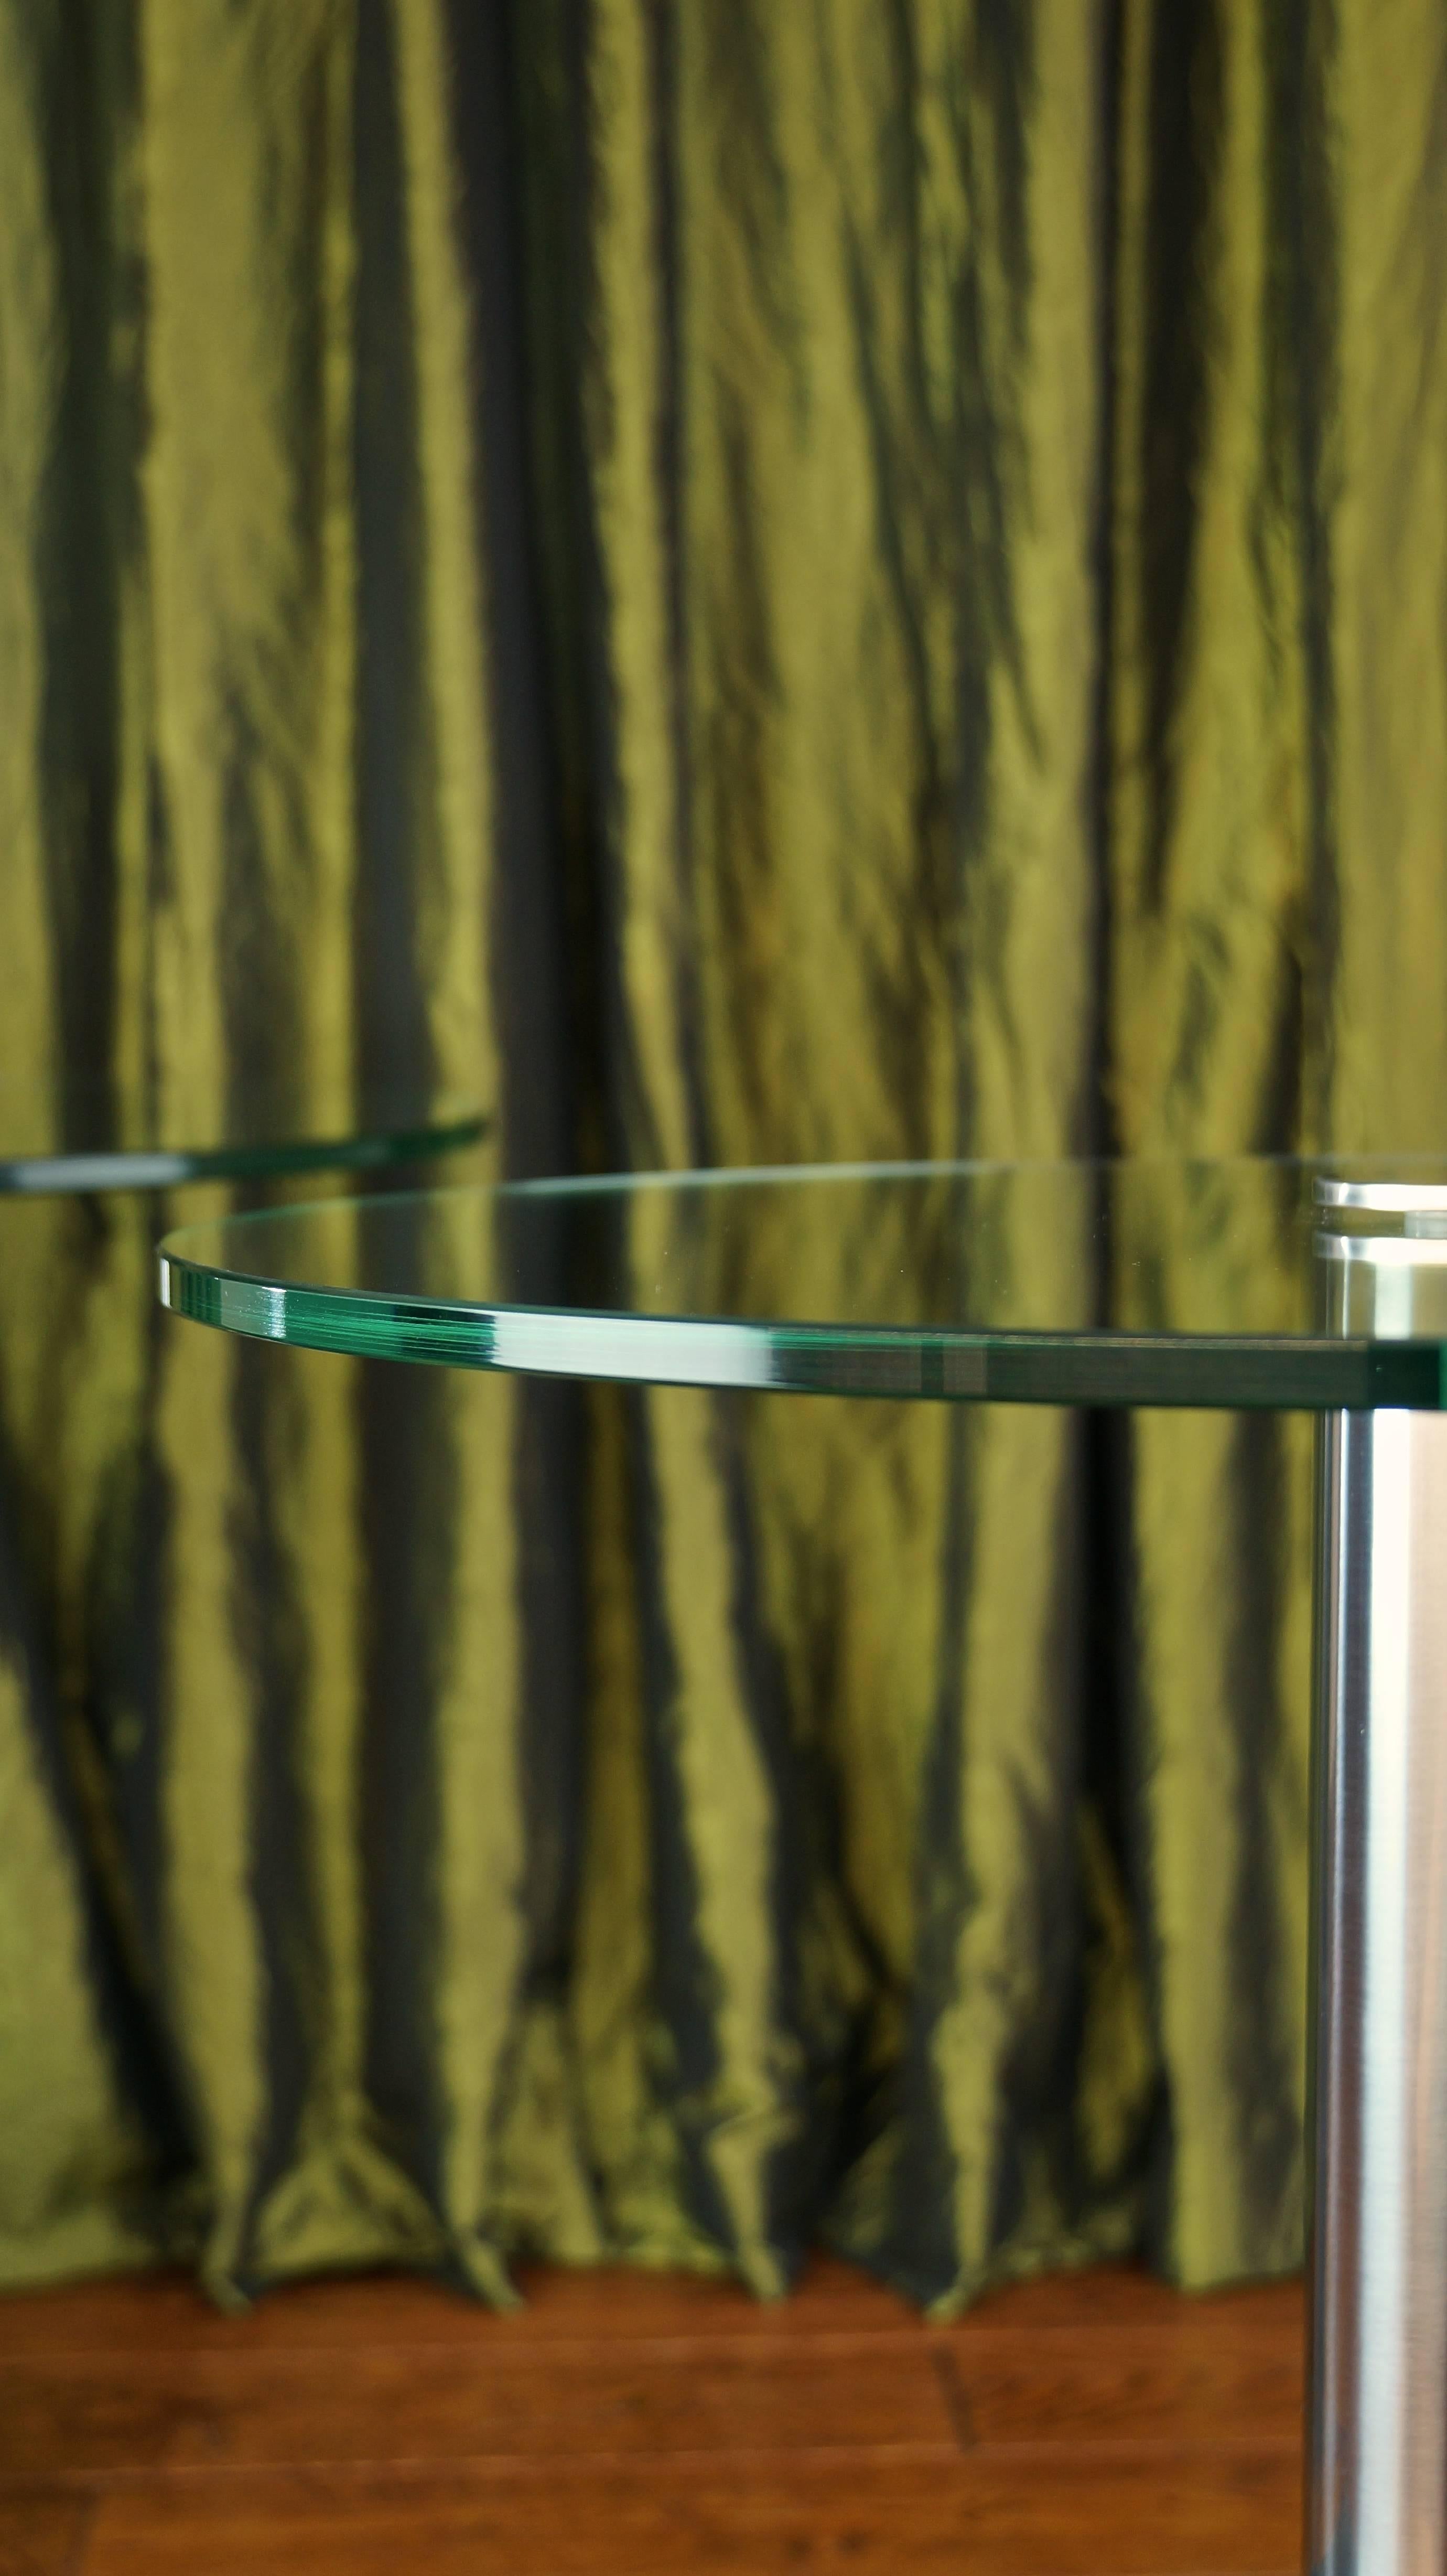 Pair of Vintage Marble and Glass HK2 Side Tables by Hank Kwint, Metaform 1980s 8